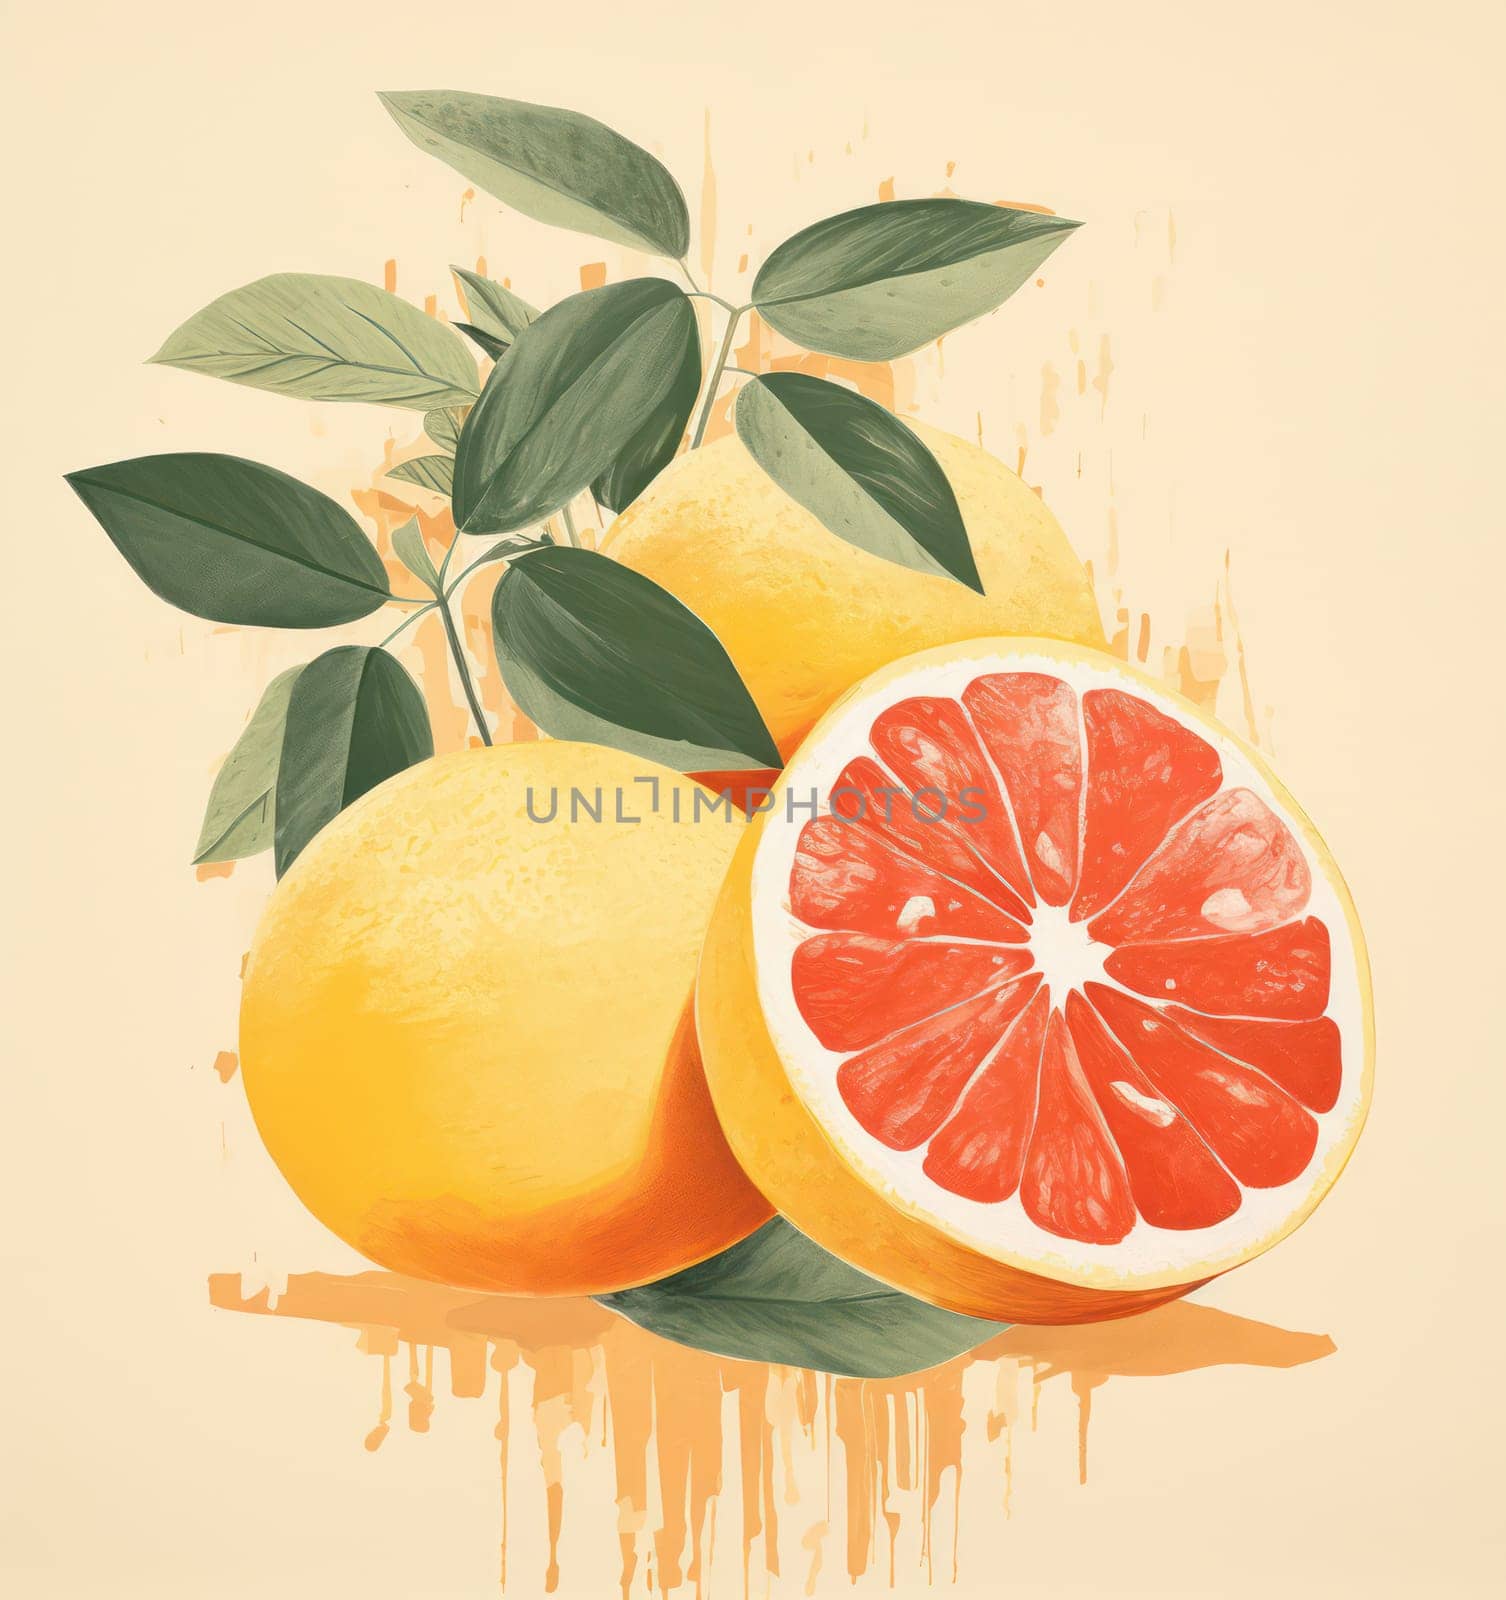 Fresh Juicy Citrus Slices: A Vibrant Slice of Sweetness on a Green Leaf with a Splash of Health and Vitamin C